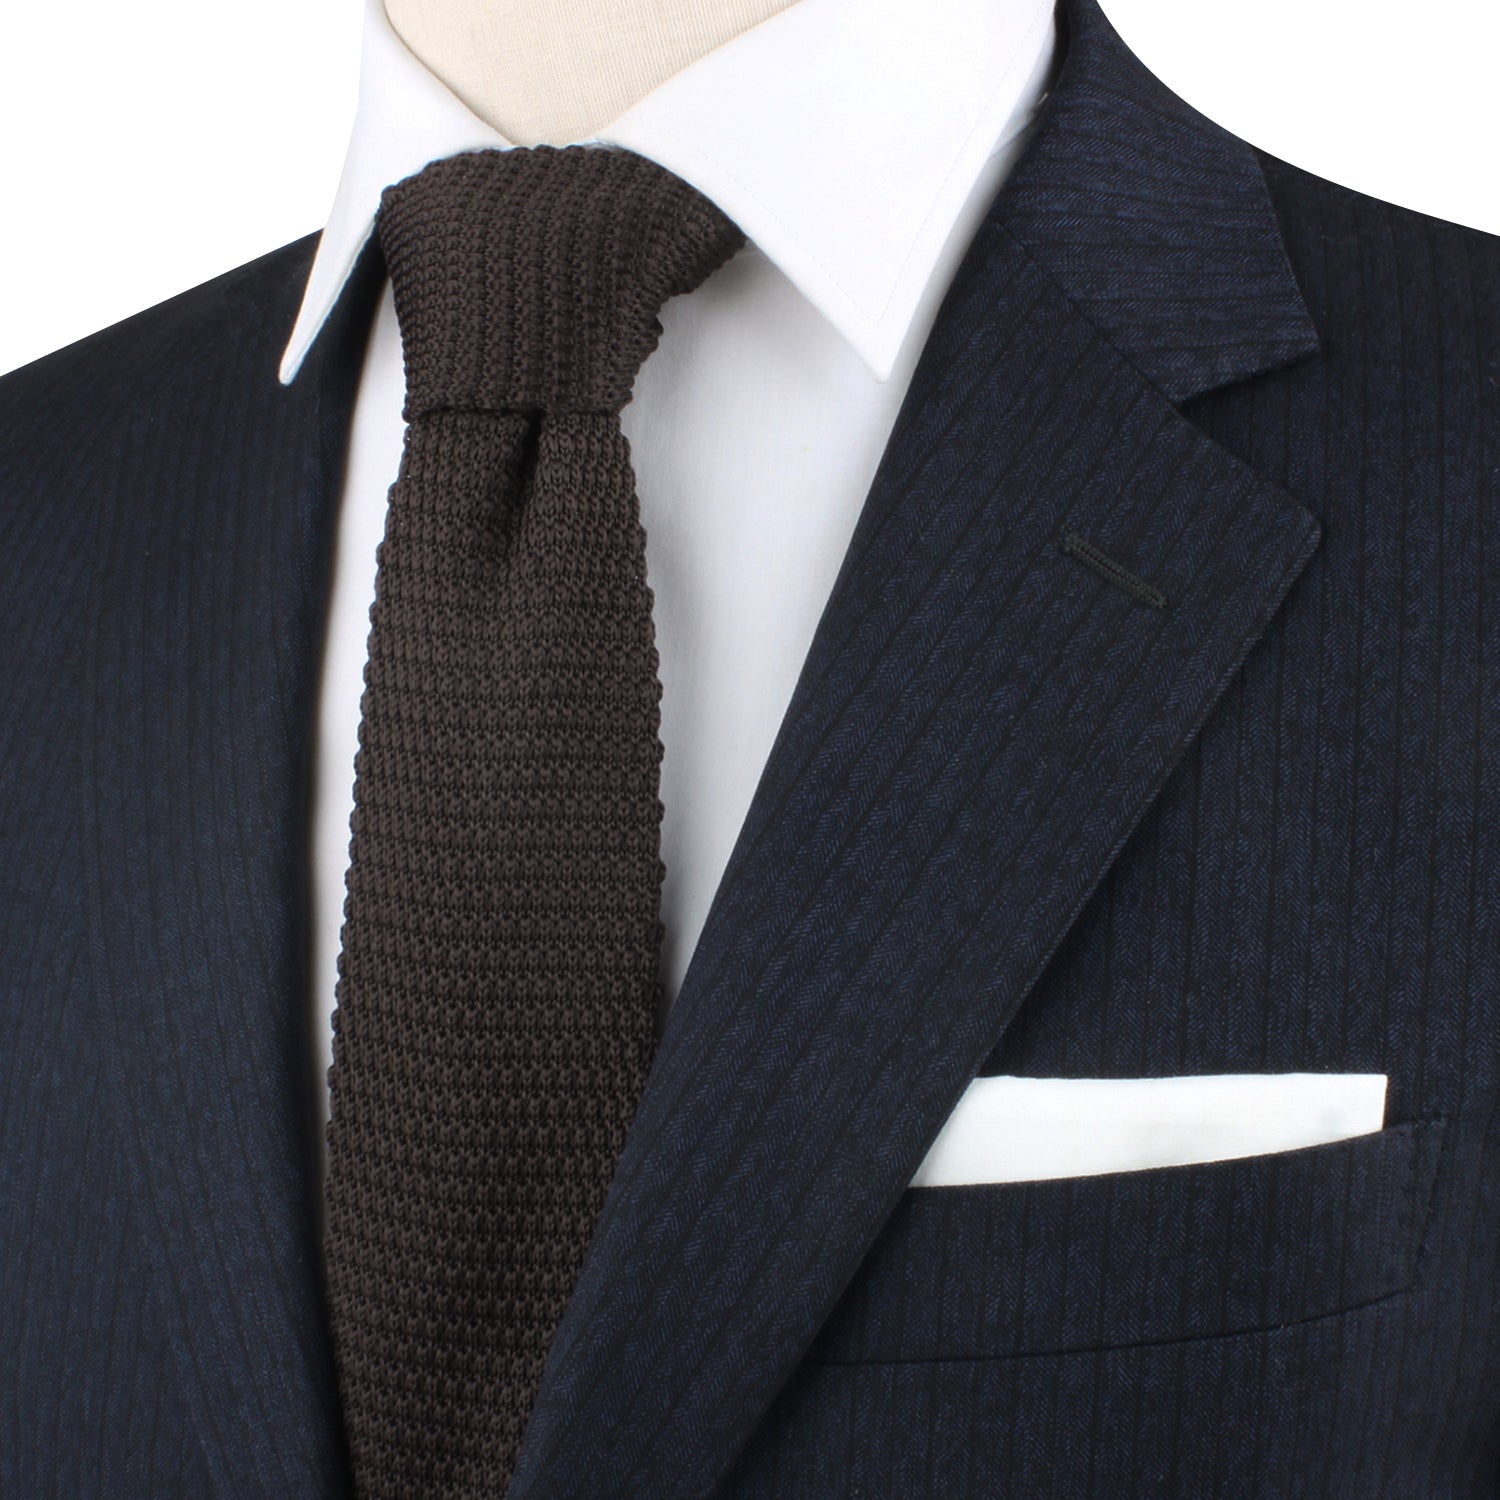 A mannequin wearing a suit and tie with a Brown Knitted Skinny Tie.